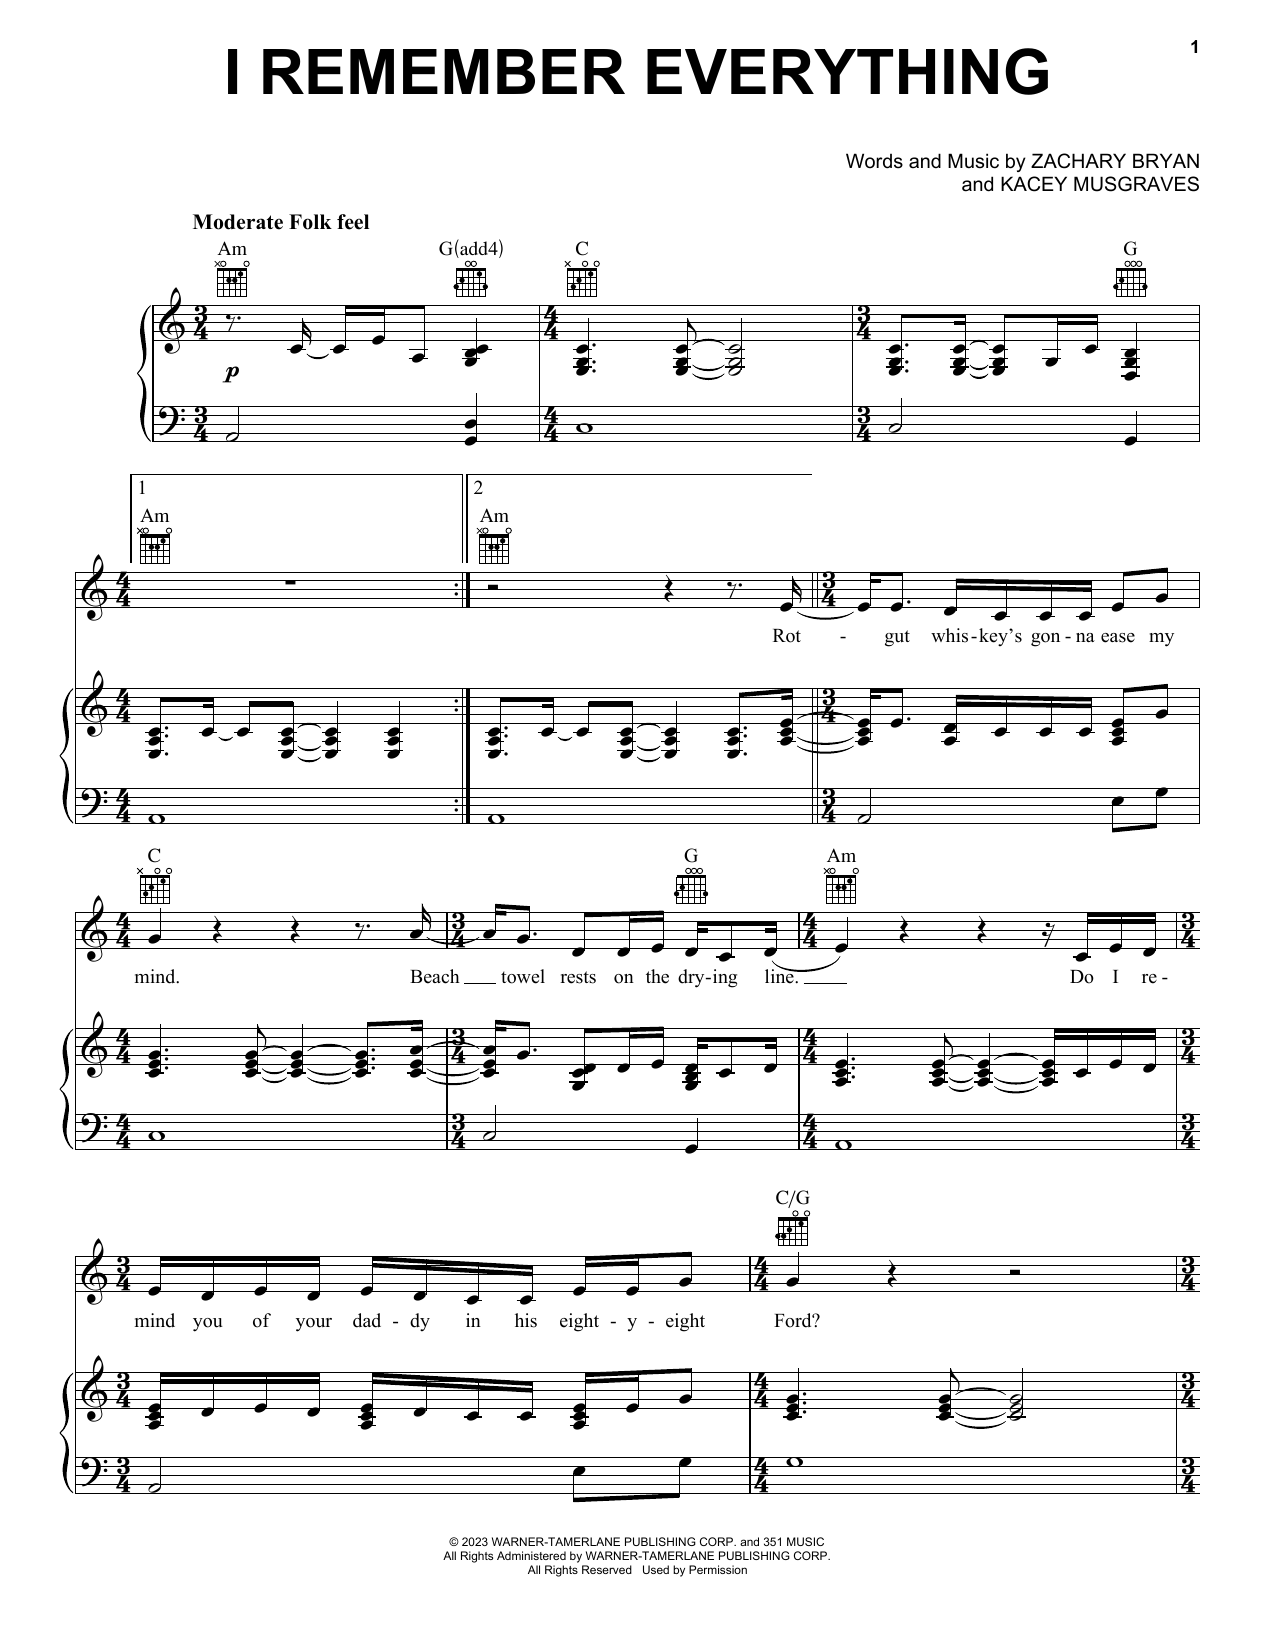 Zach Bryan feat. Kacey Musgraves I Remember Everything (feat. Kacey Musgraves) sheet music notes printable PDF score